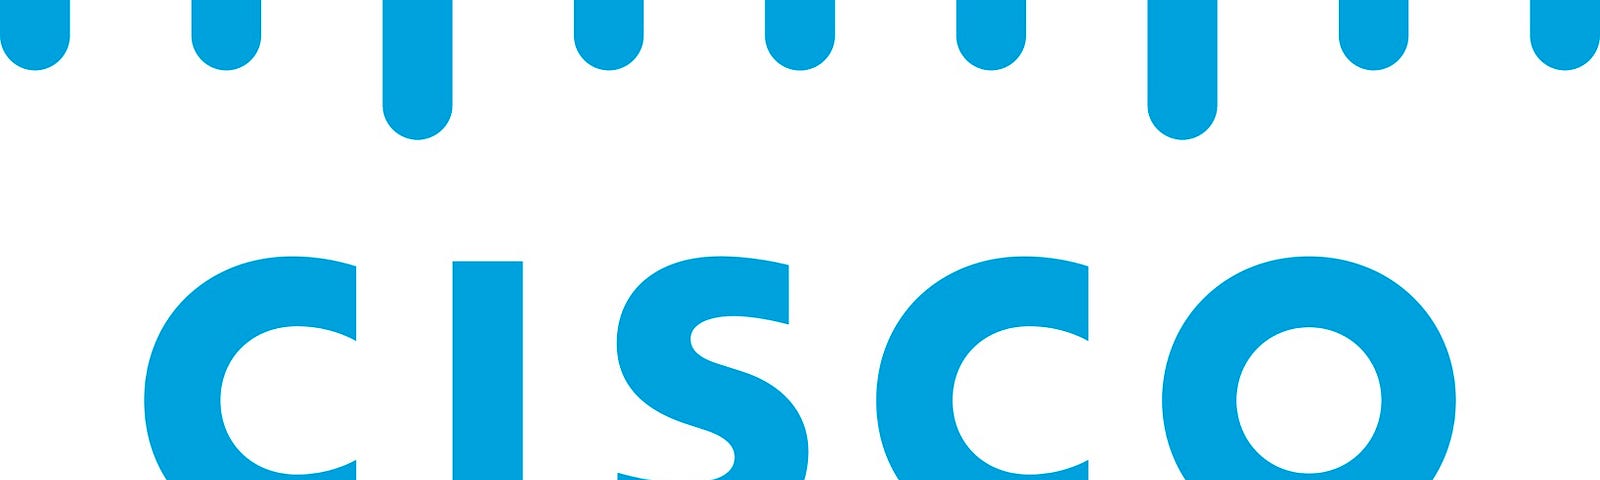 IMAGE: The Cisco and Splunk logos pasted together